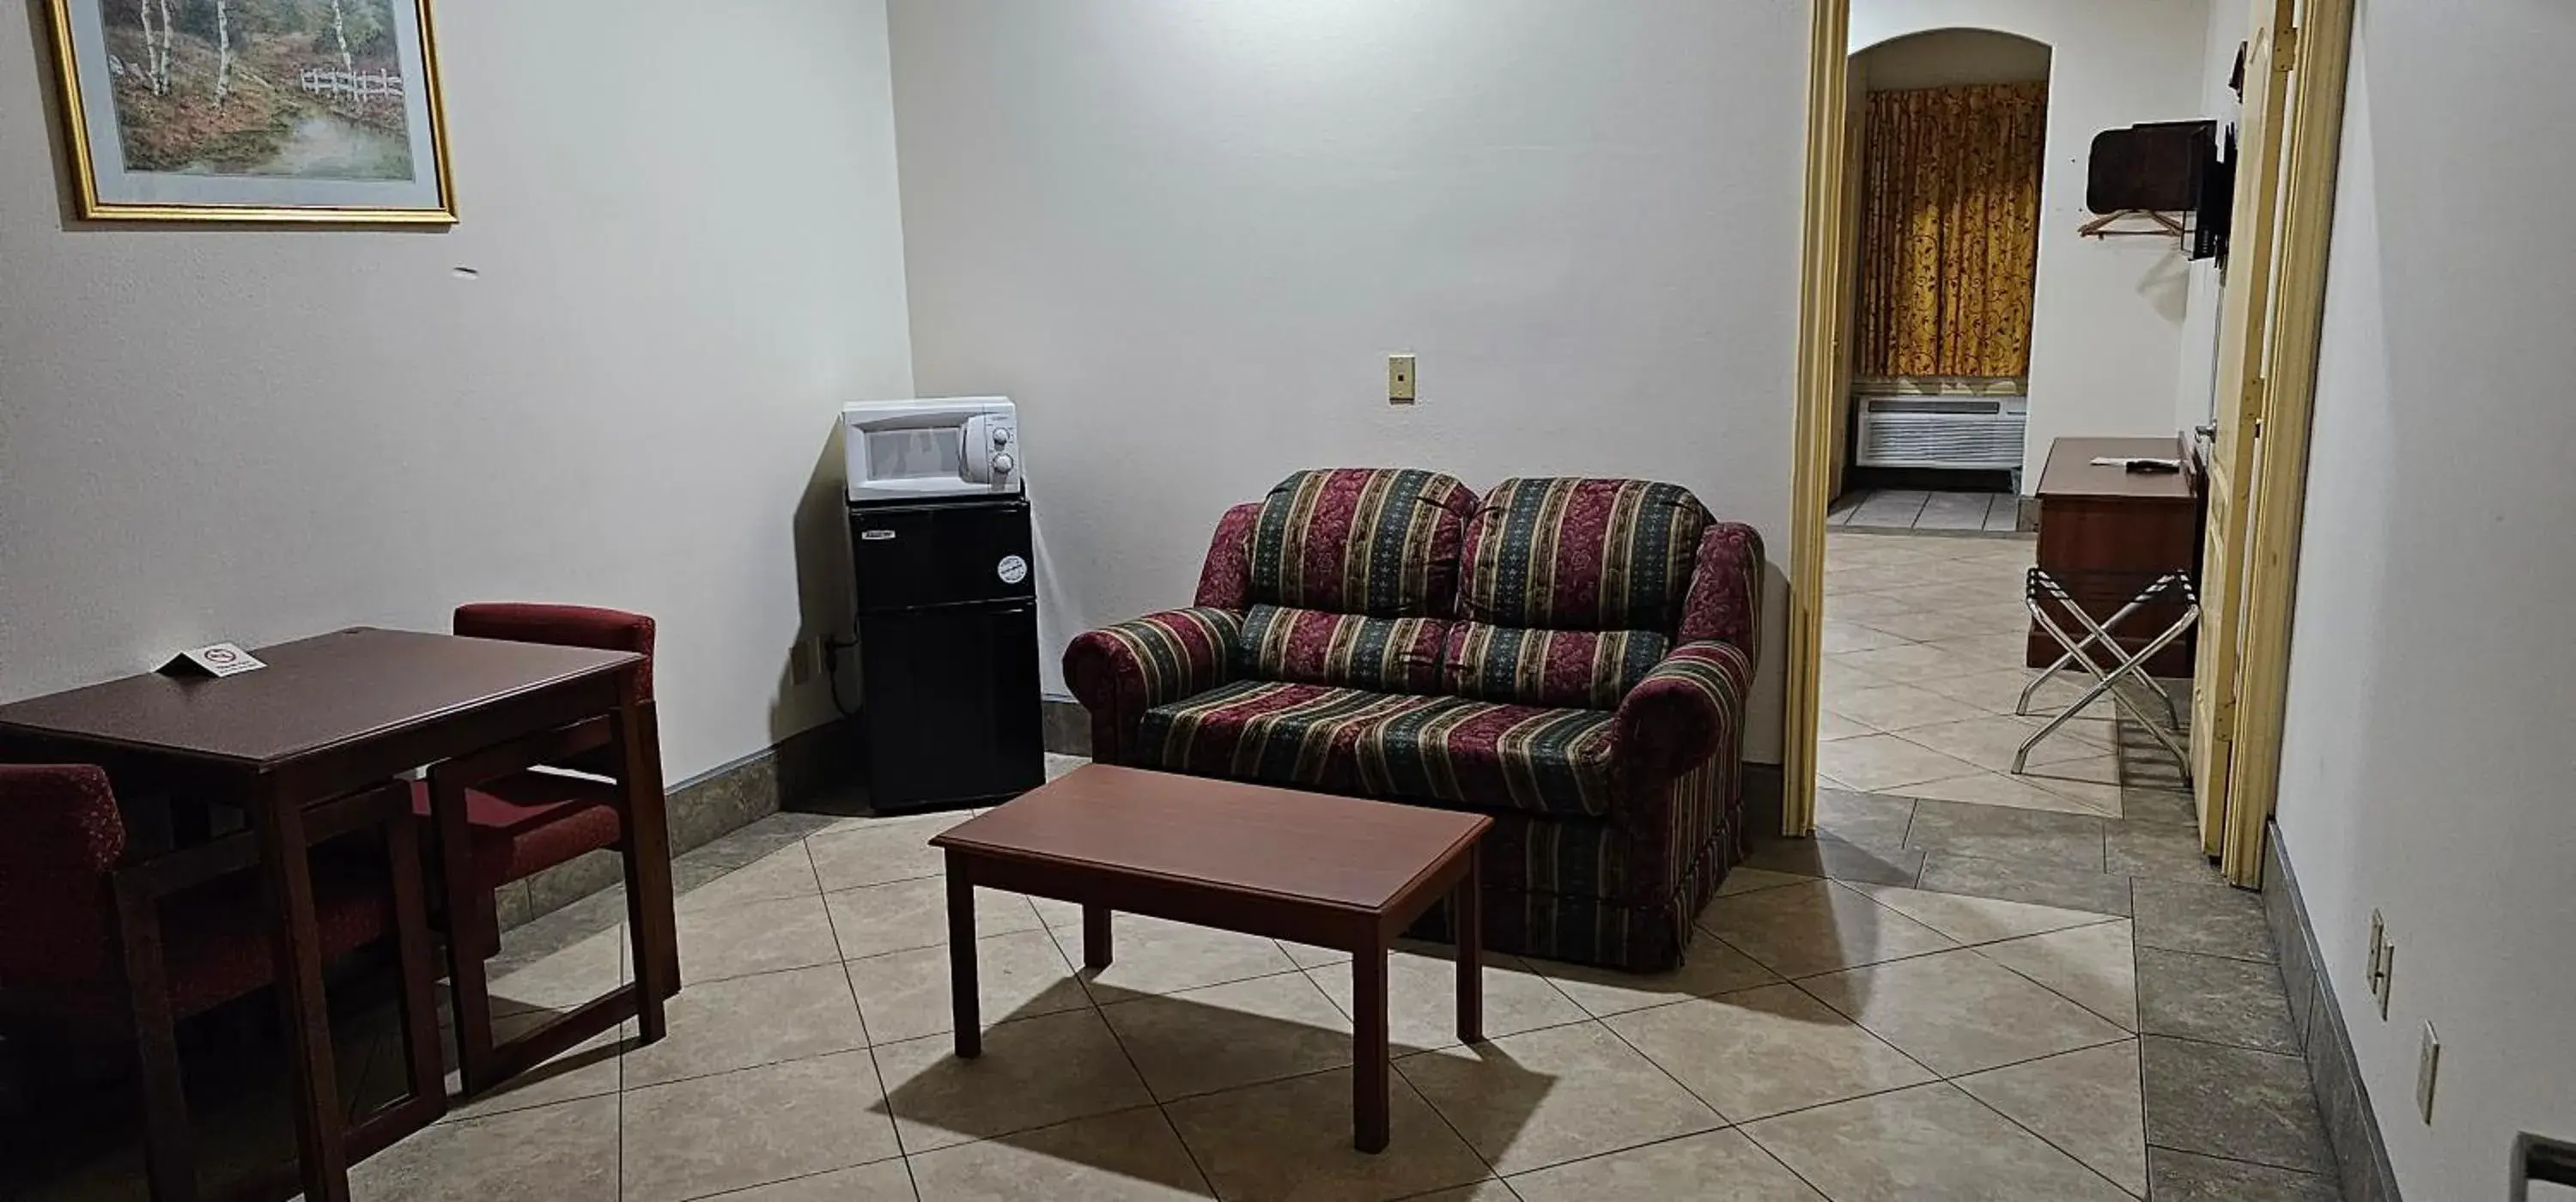 Seating Area in Texas Inn and Suites RGV